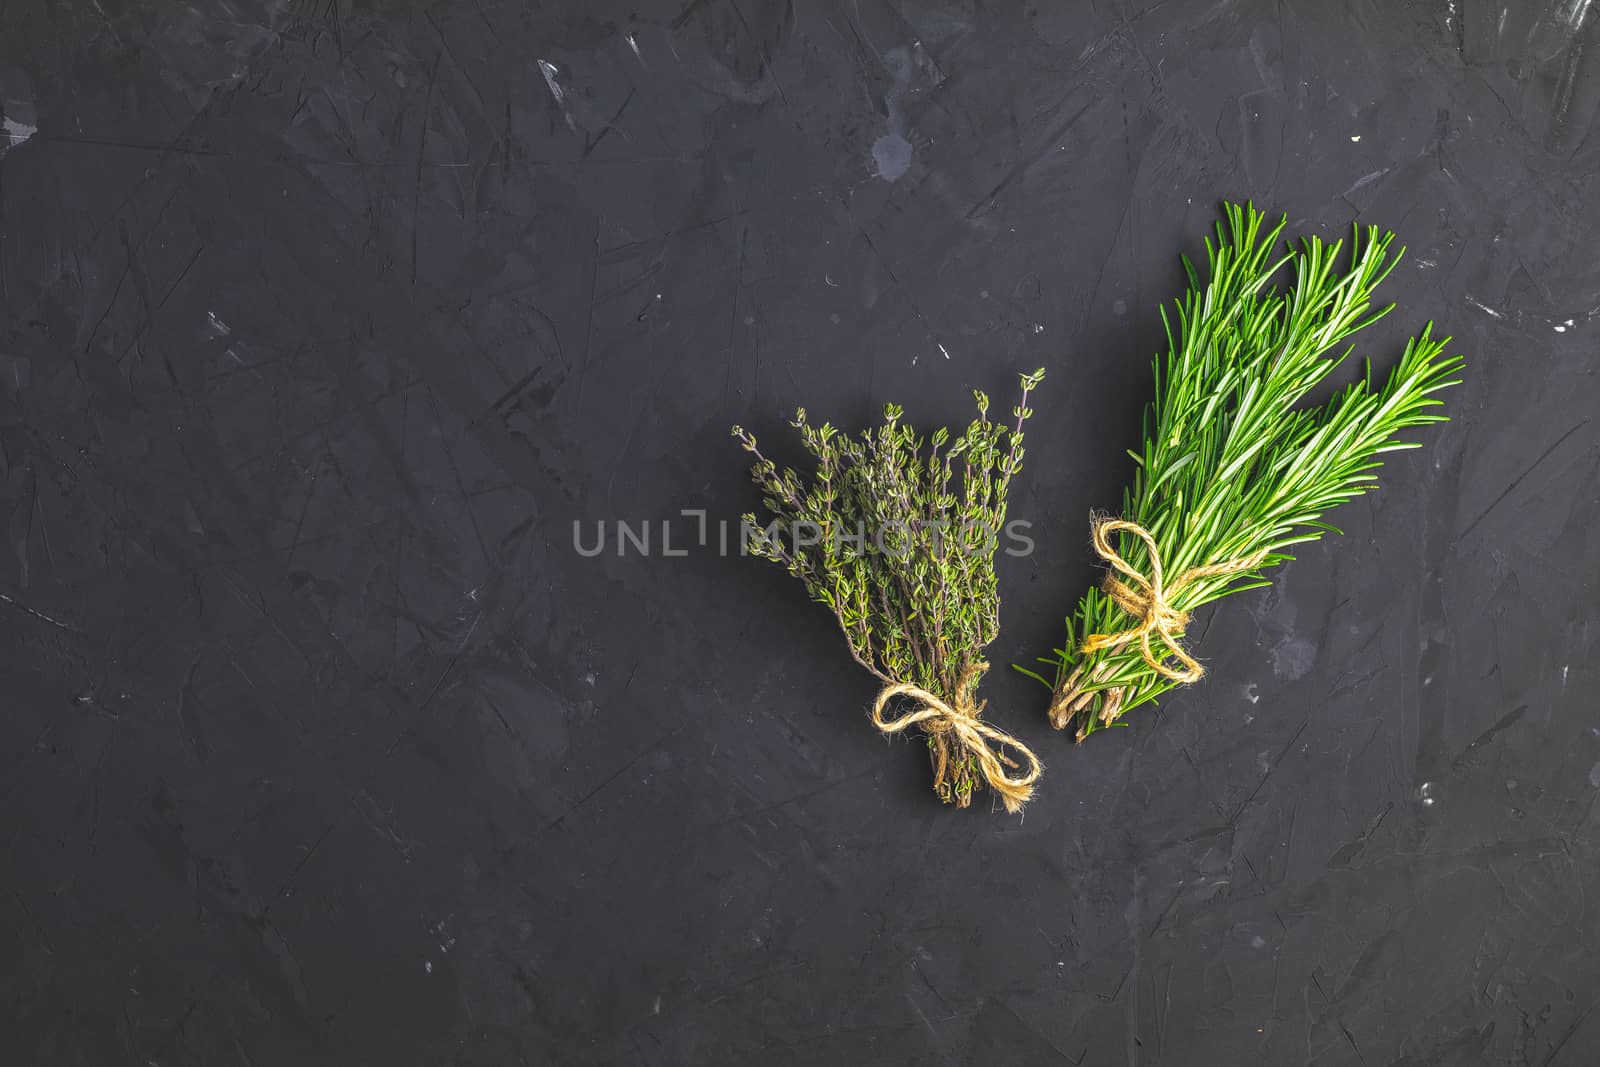 Rosemary and thyme bunches of bouquets on black stone concrete textured surface background. Top view with copy space for your text.